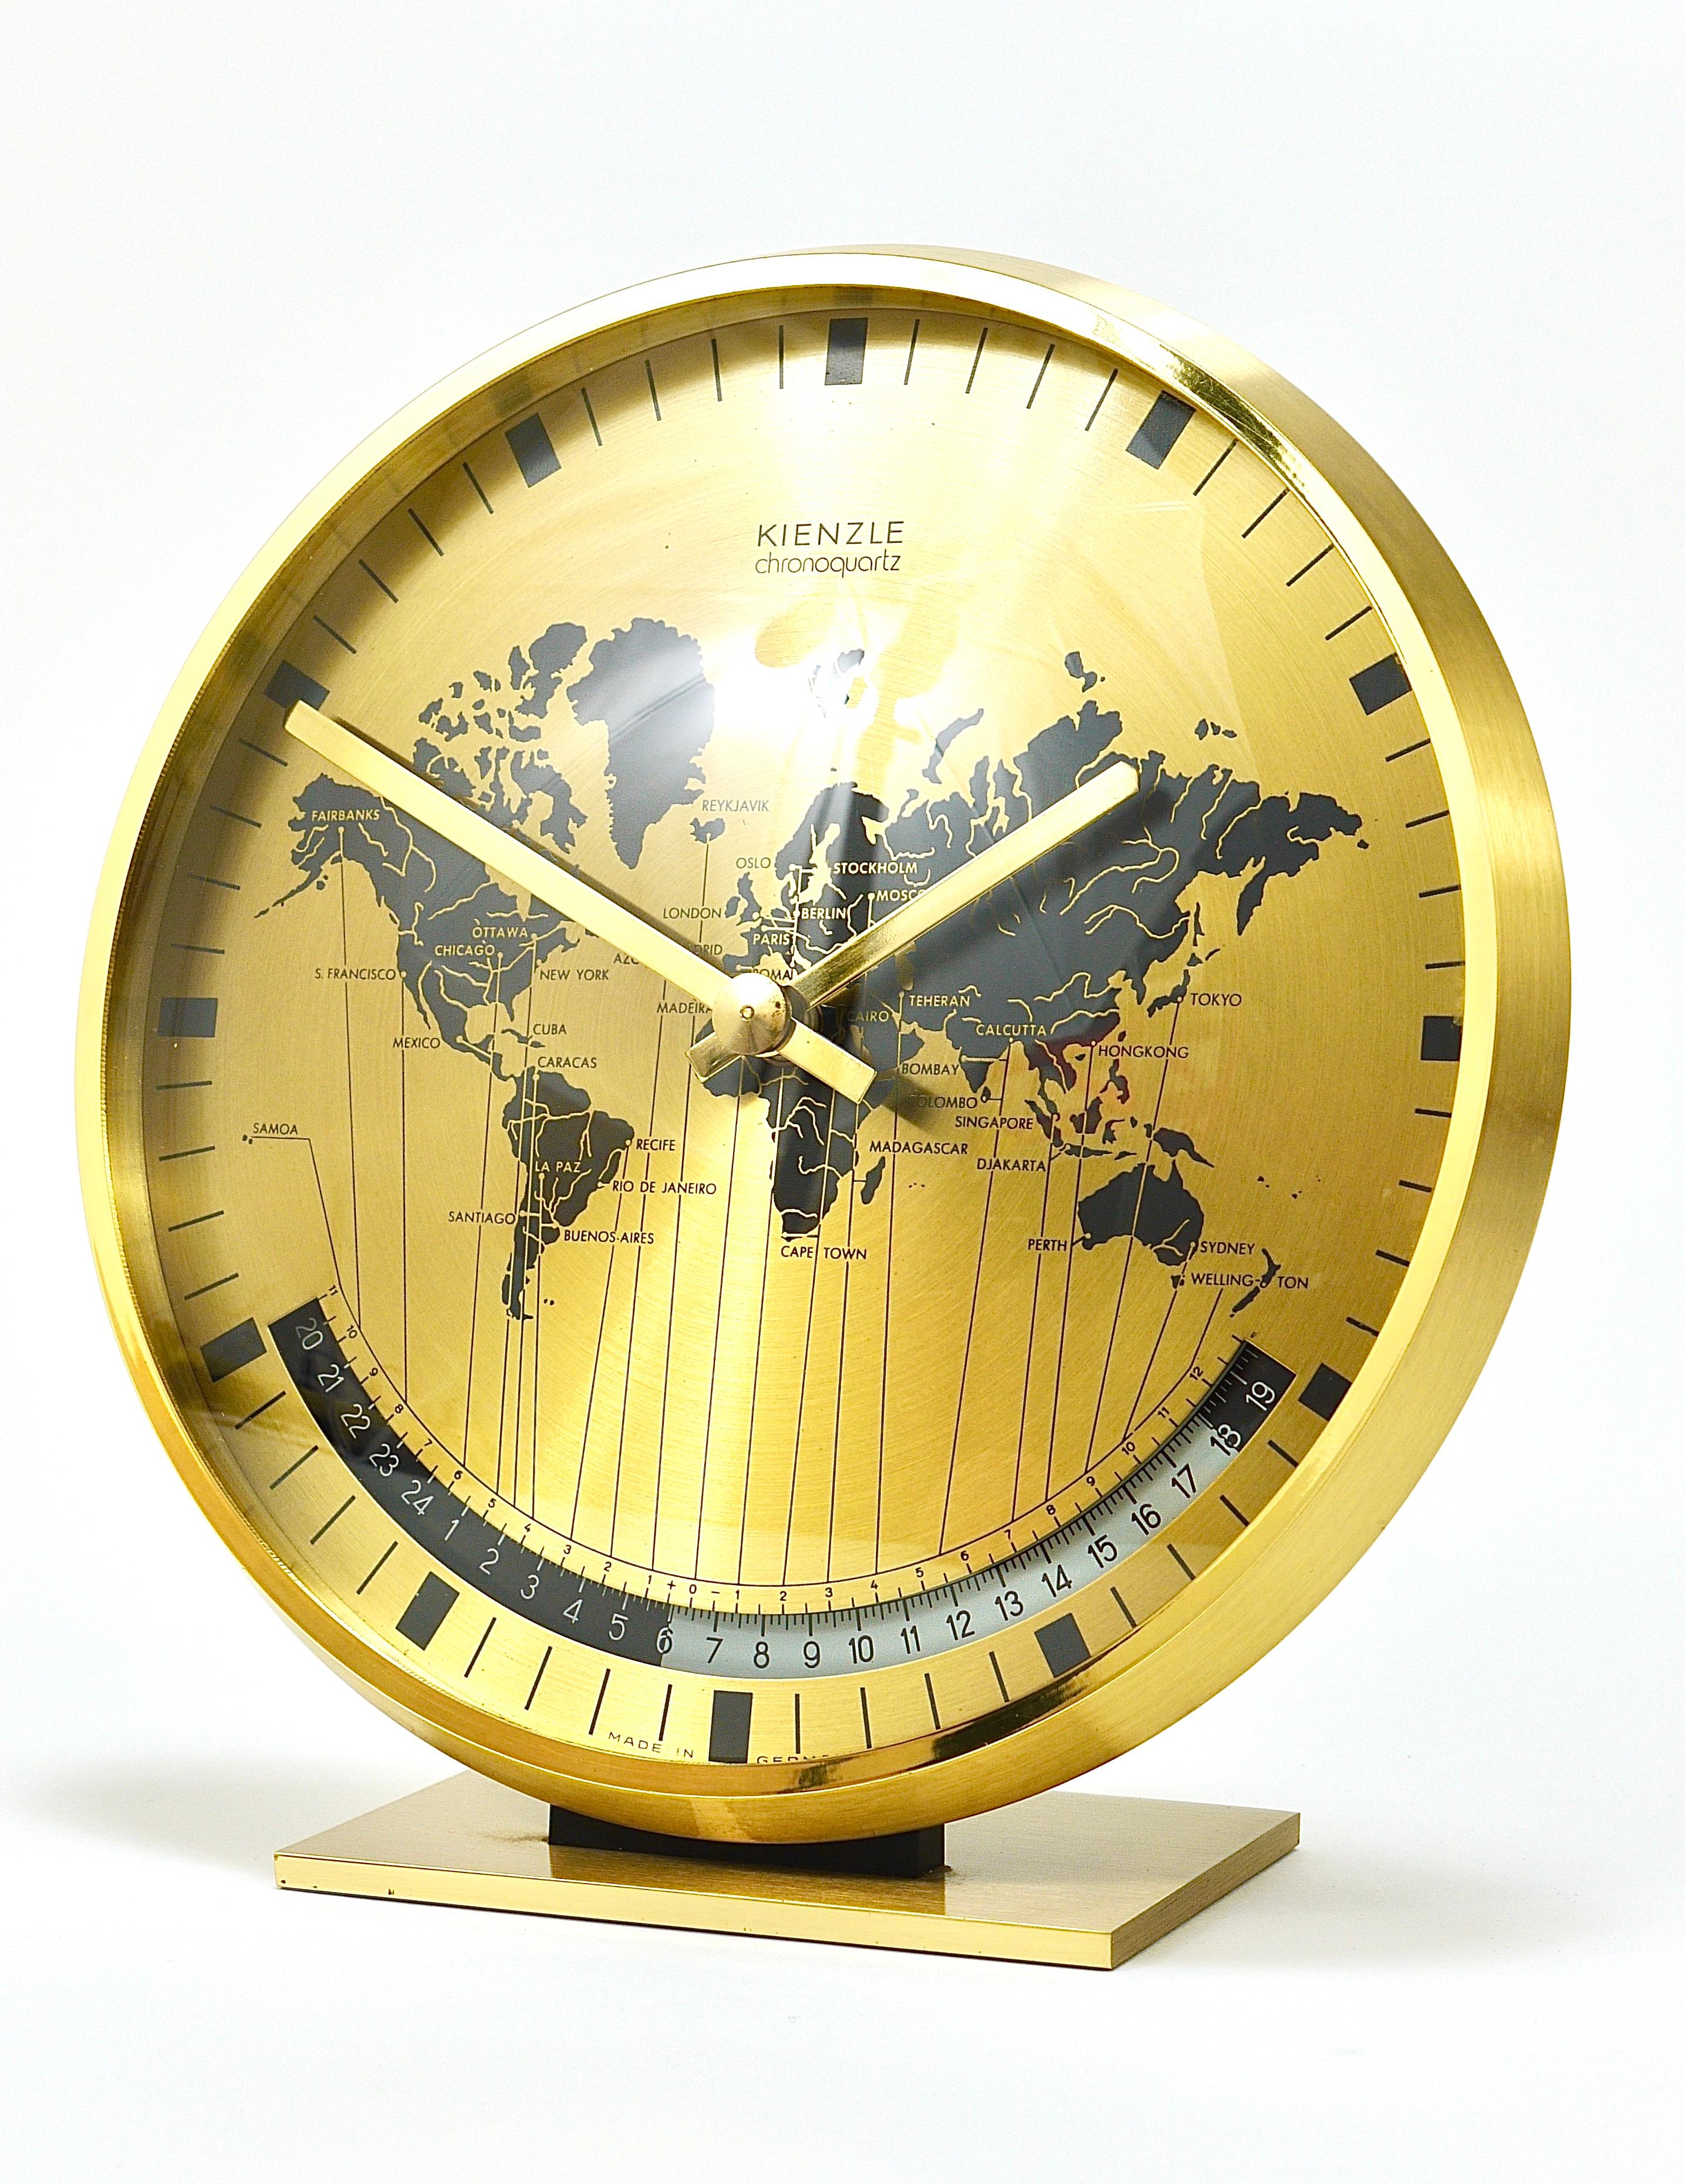 Kienzle GMT World Time Zone Brass Table Clock, Midcentury, Germany, 1960s For Sale 11